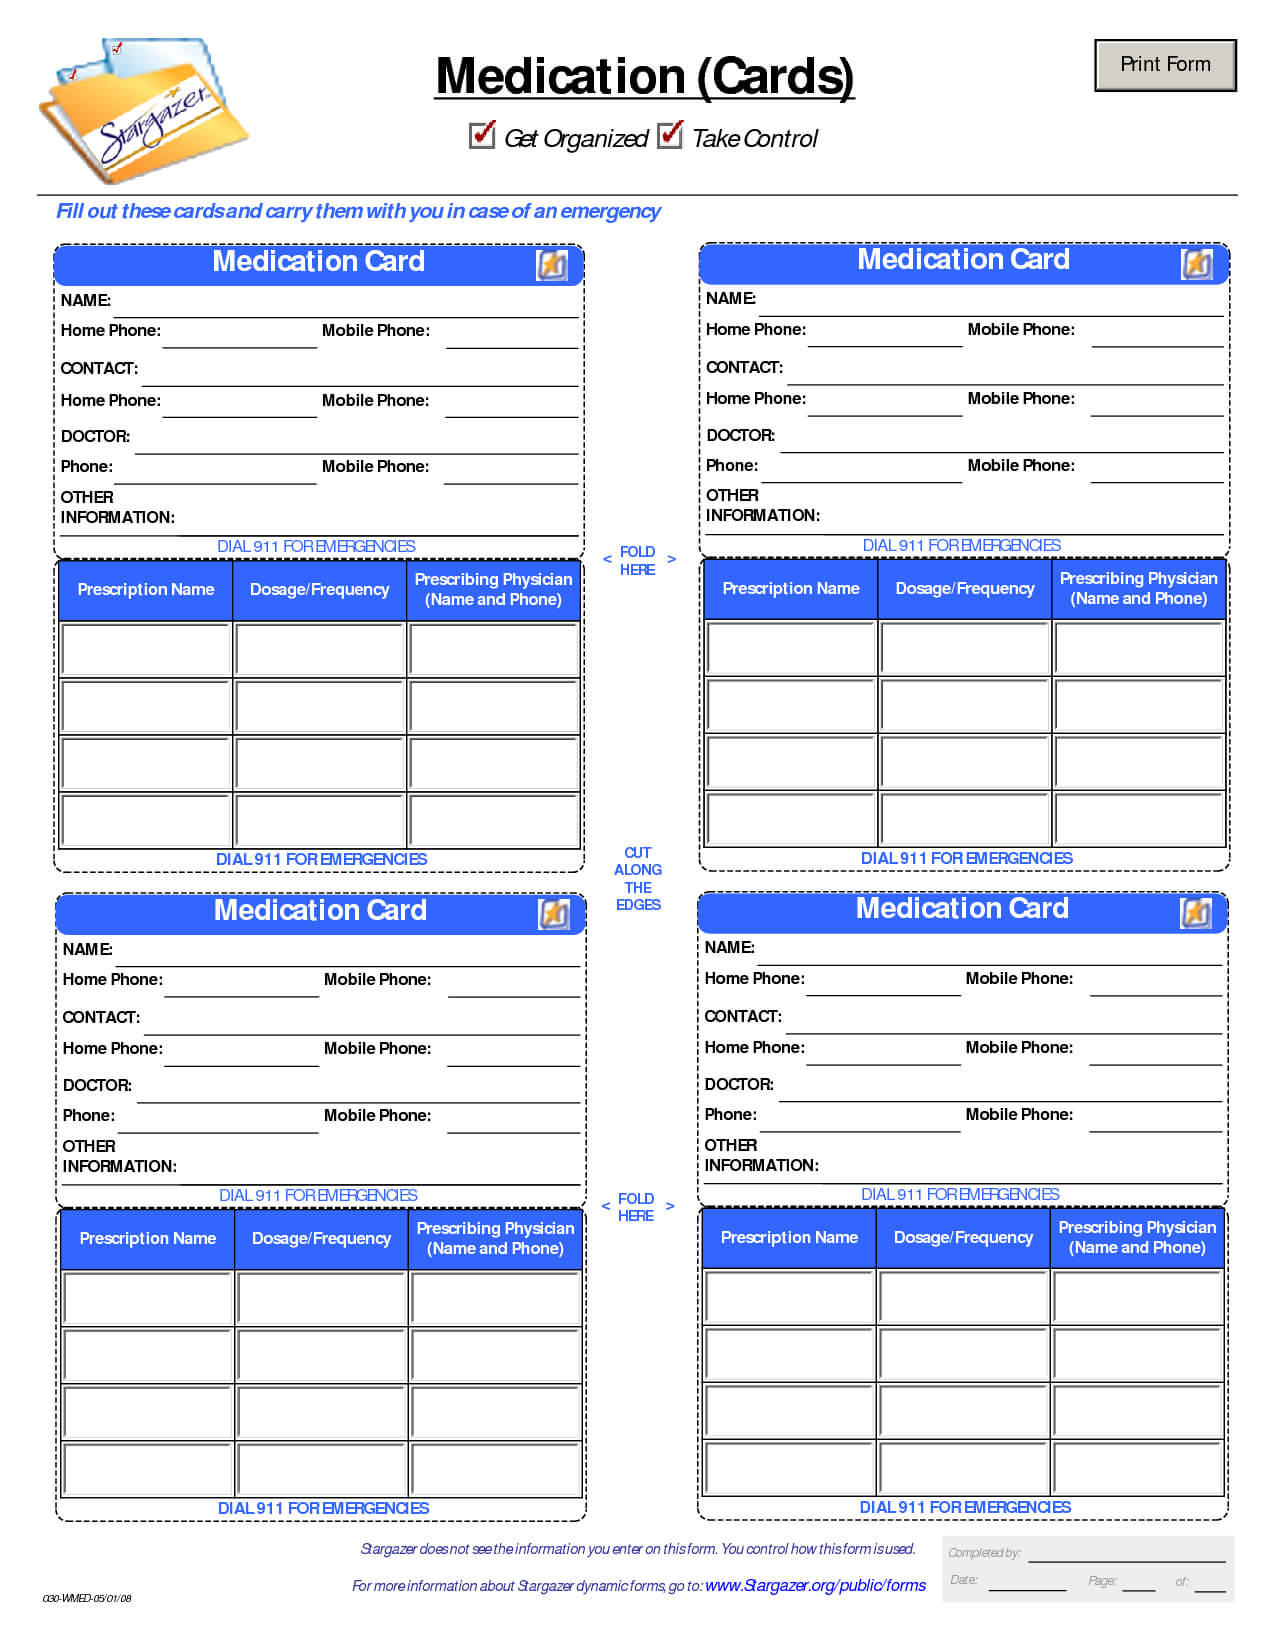 Patient Medication Card Template | Medication List, Medical Regarding Medication Card Template